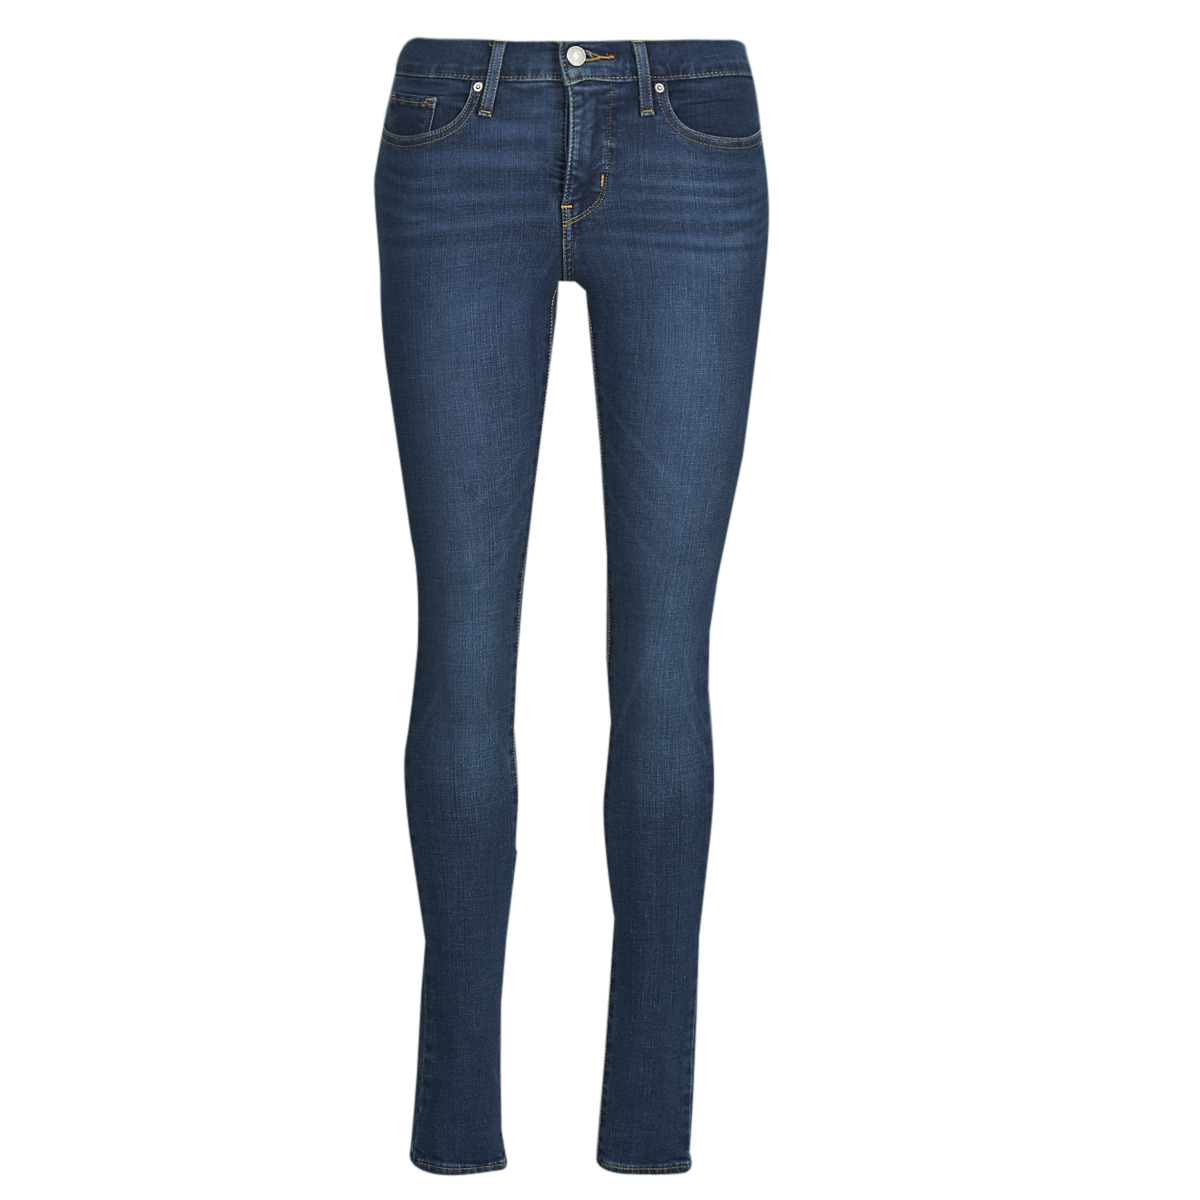 Levi's - Women Skinny Jeans Blue from Spartoo GOOFASH